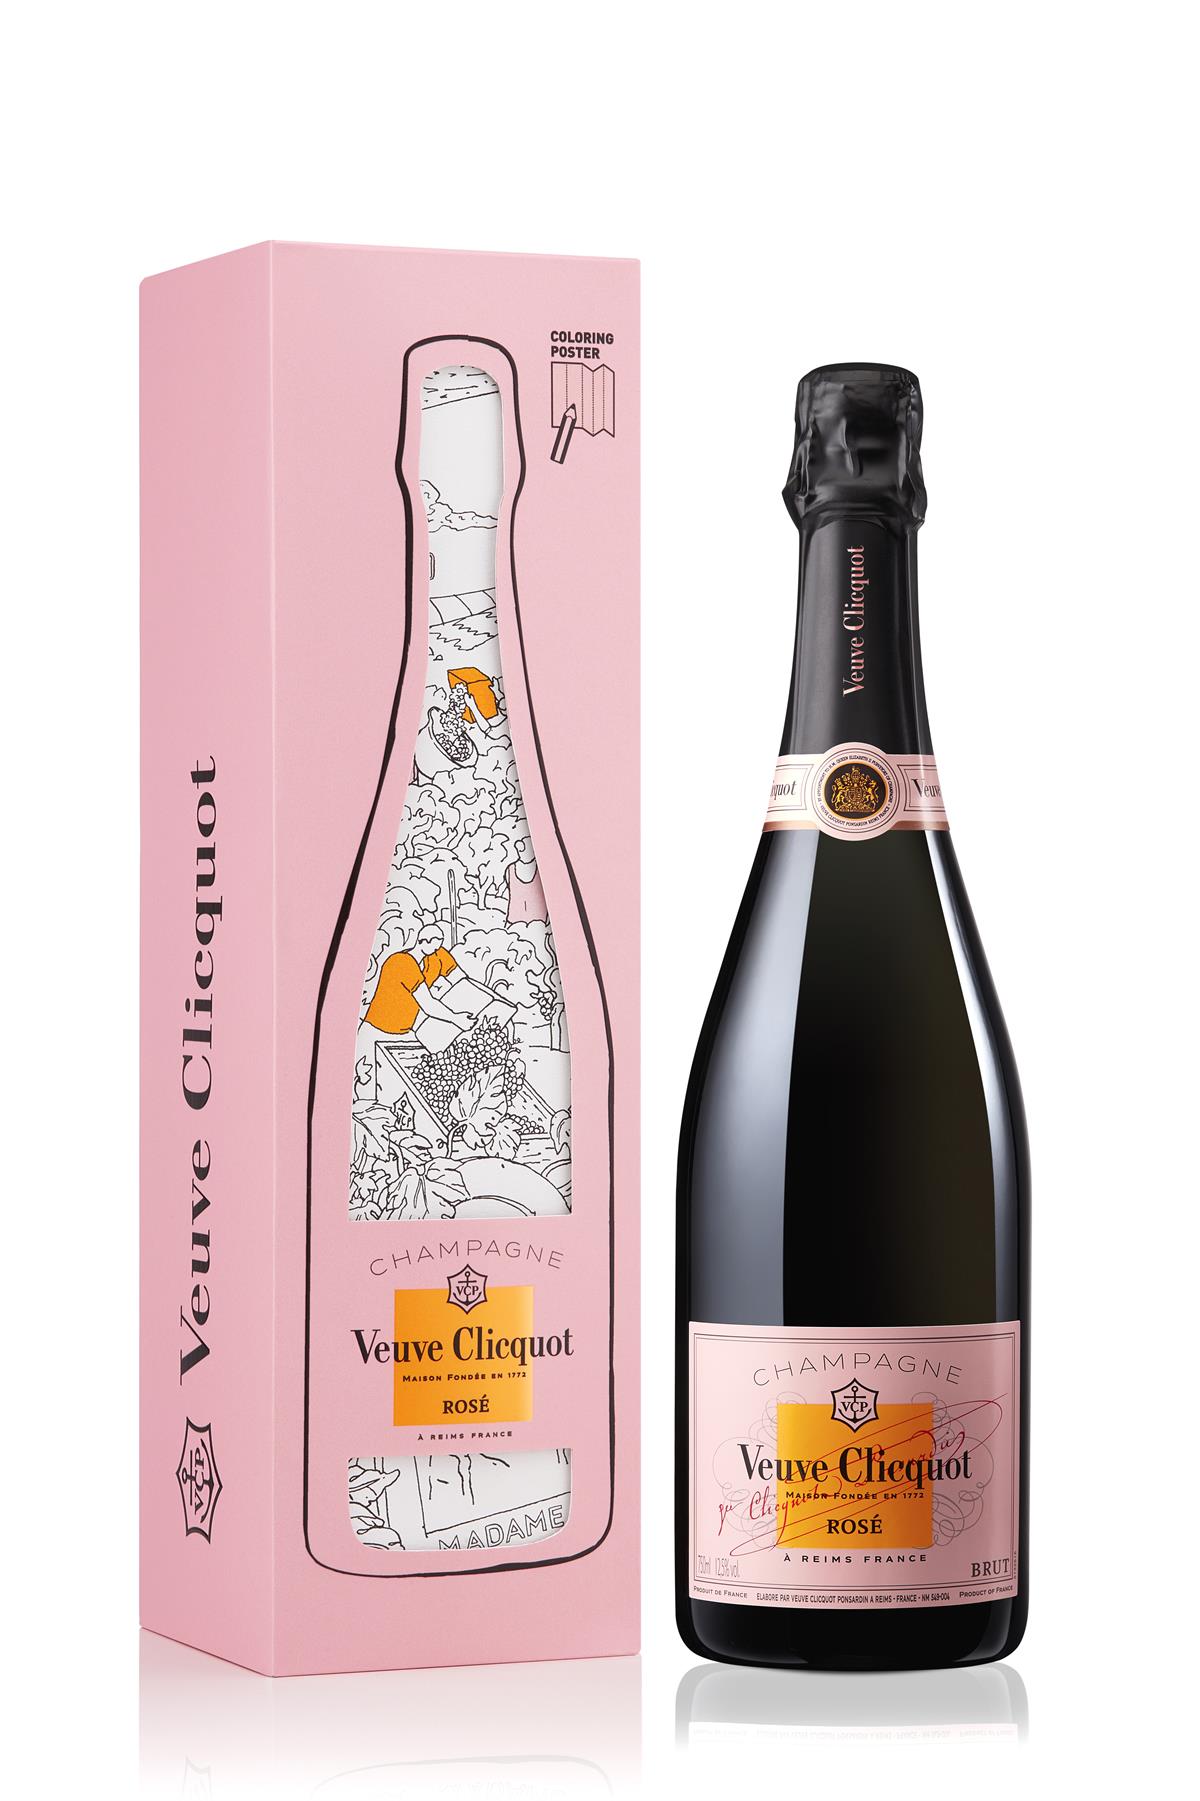 VCP-COLORAMA-ROSE-BRUT-NON-VINTAGE-COLORING-PACK-WITH-BOTTLE_EUR 69,95